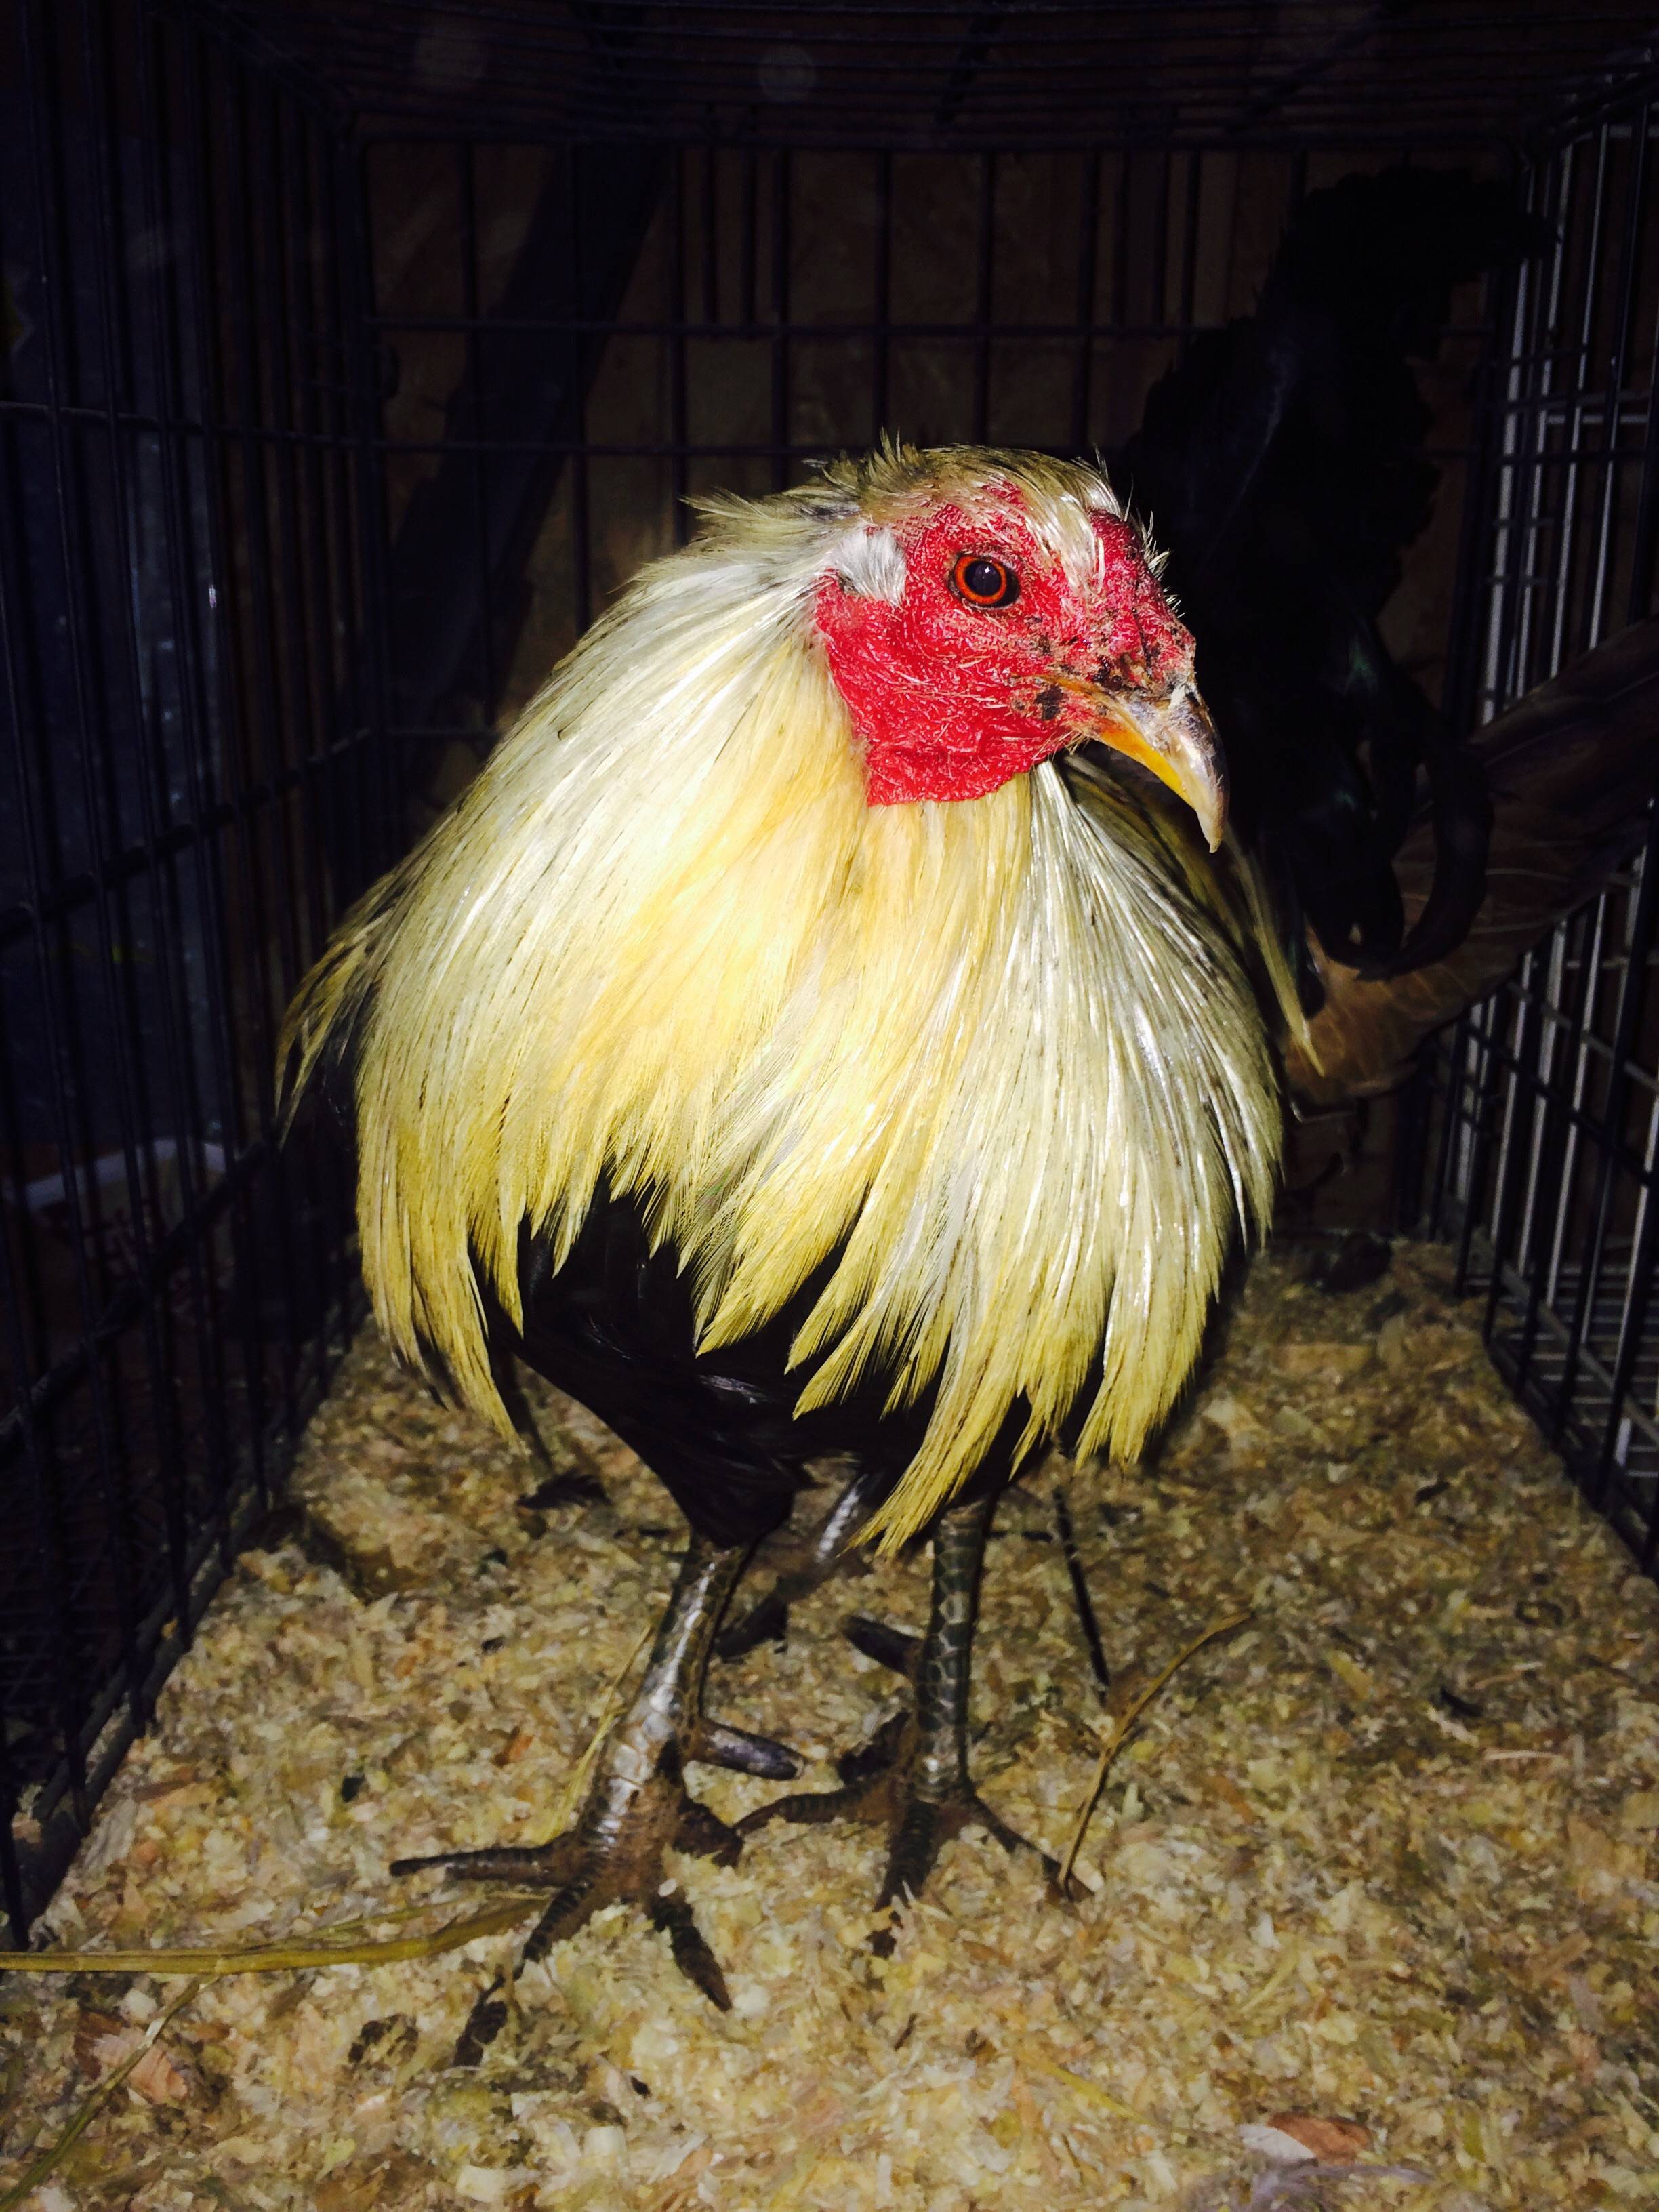 I provided a new home for a rescued fighting cock today. He's a real ...